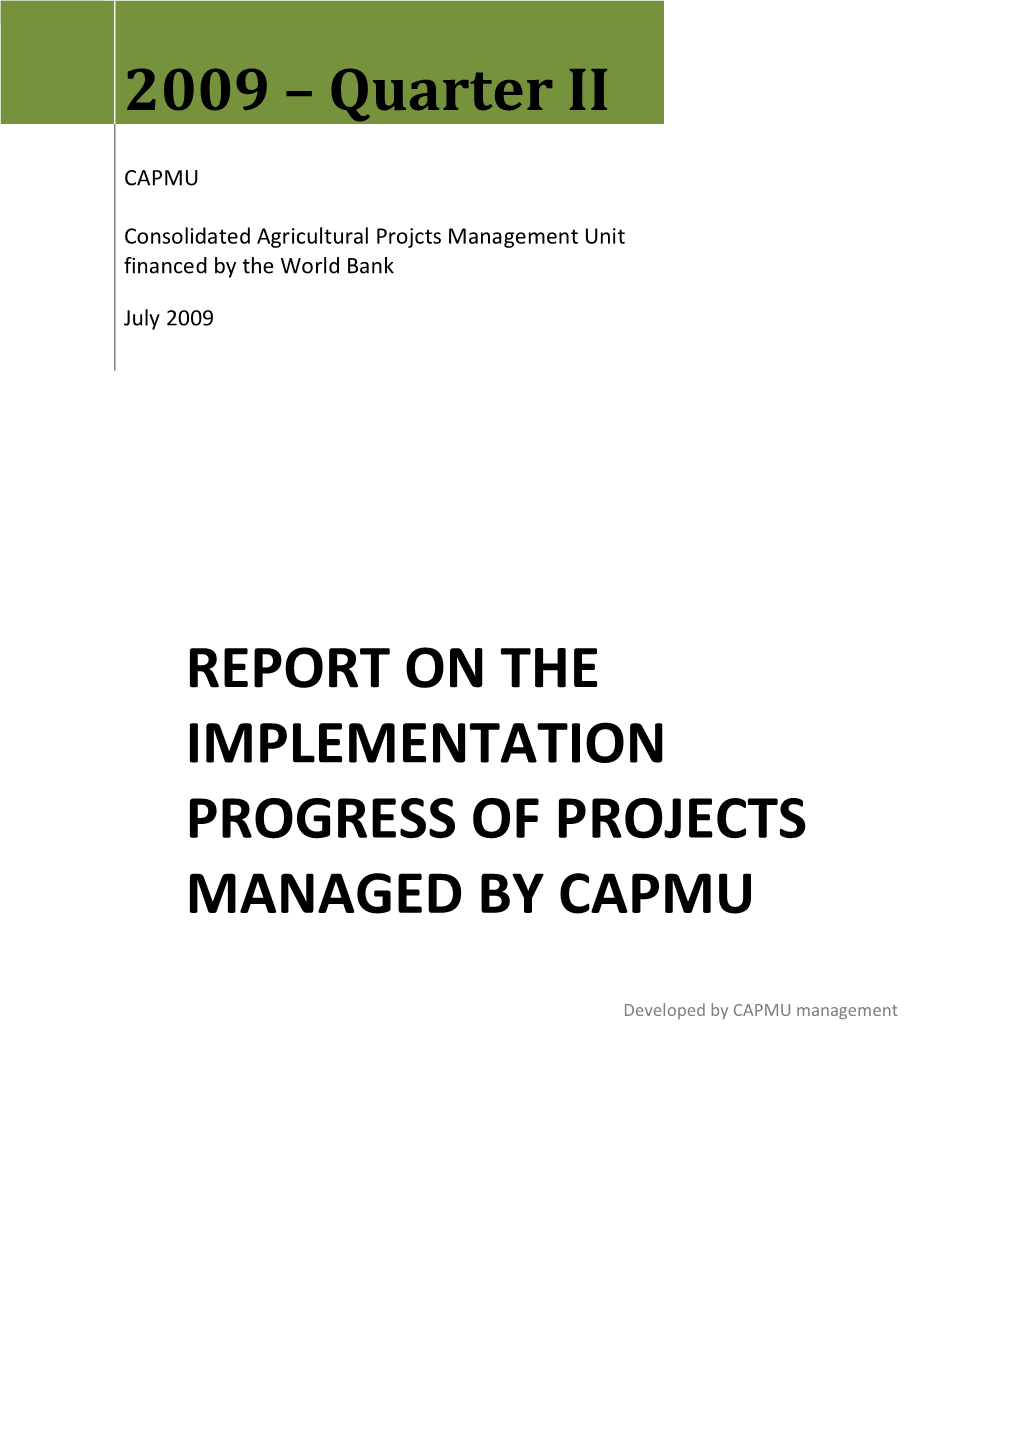 Report on the Implementation Progress of Projects Managed by Capmu